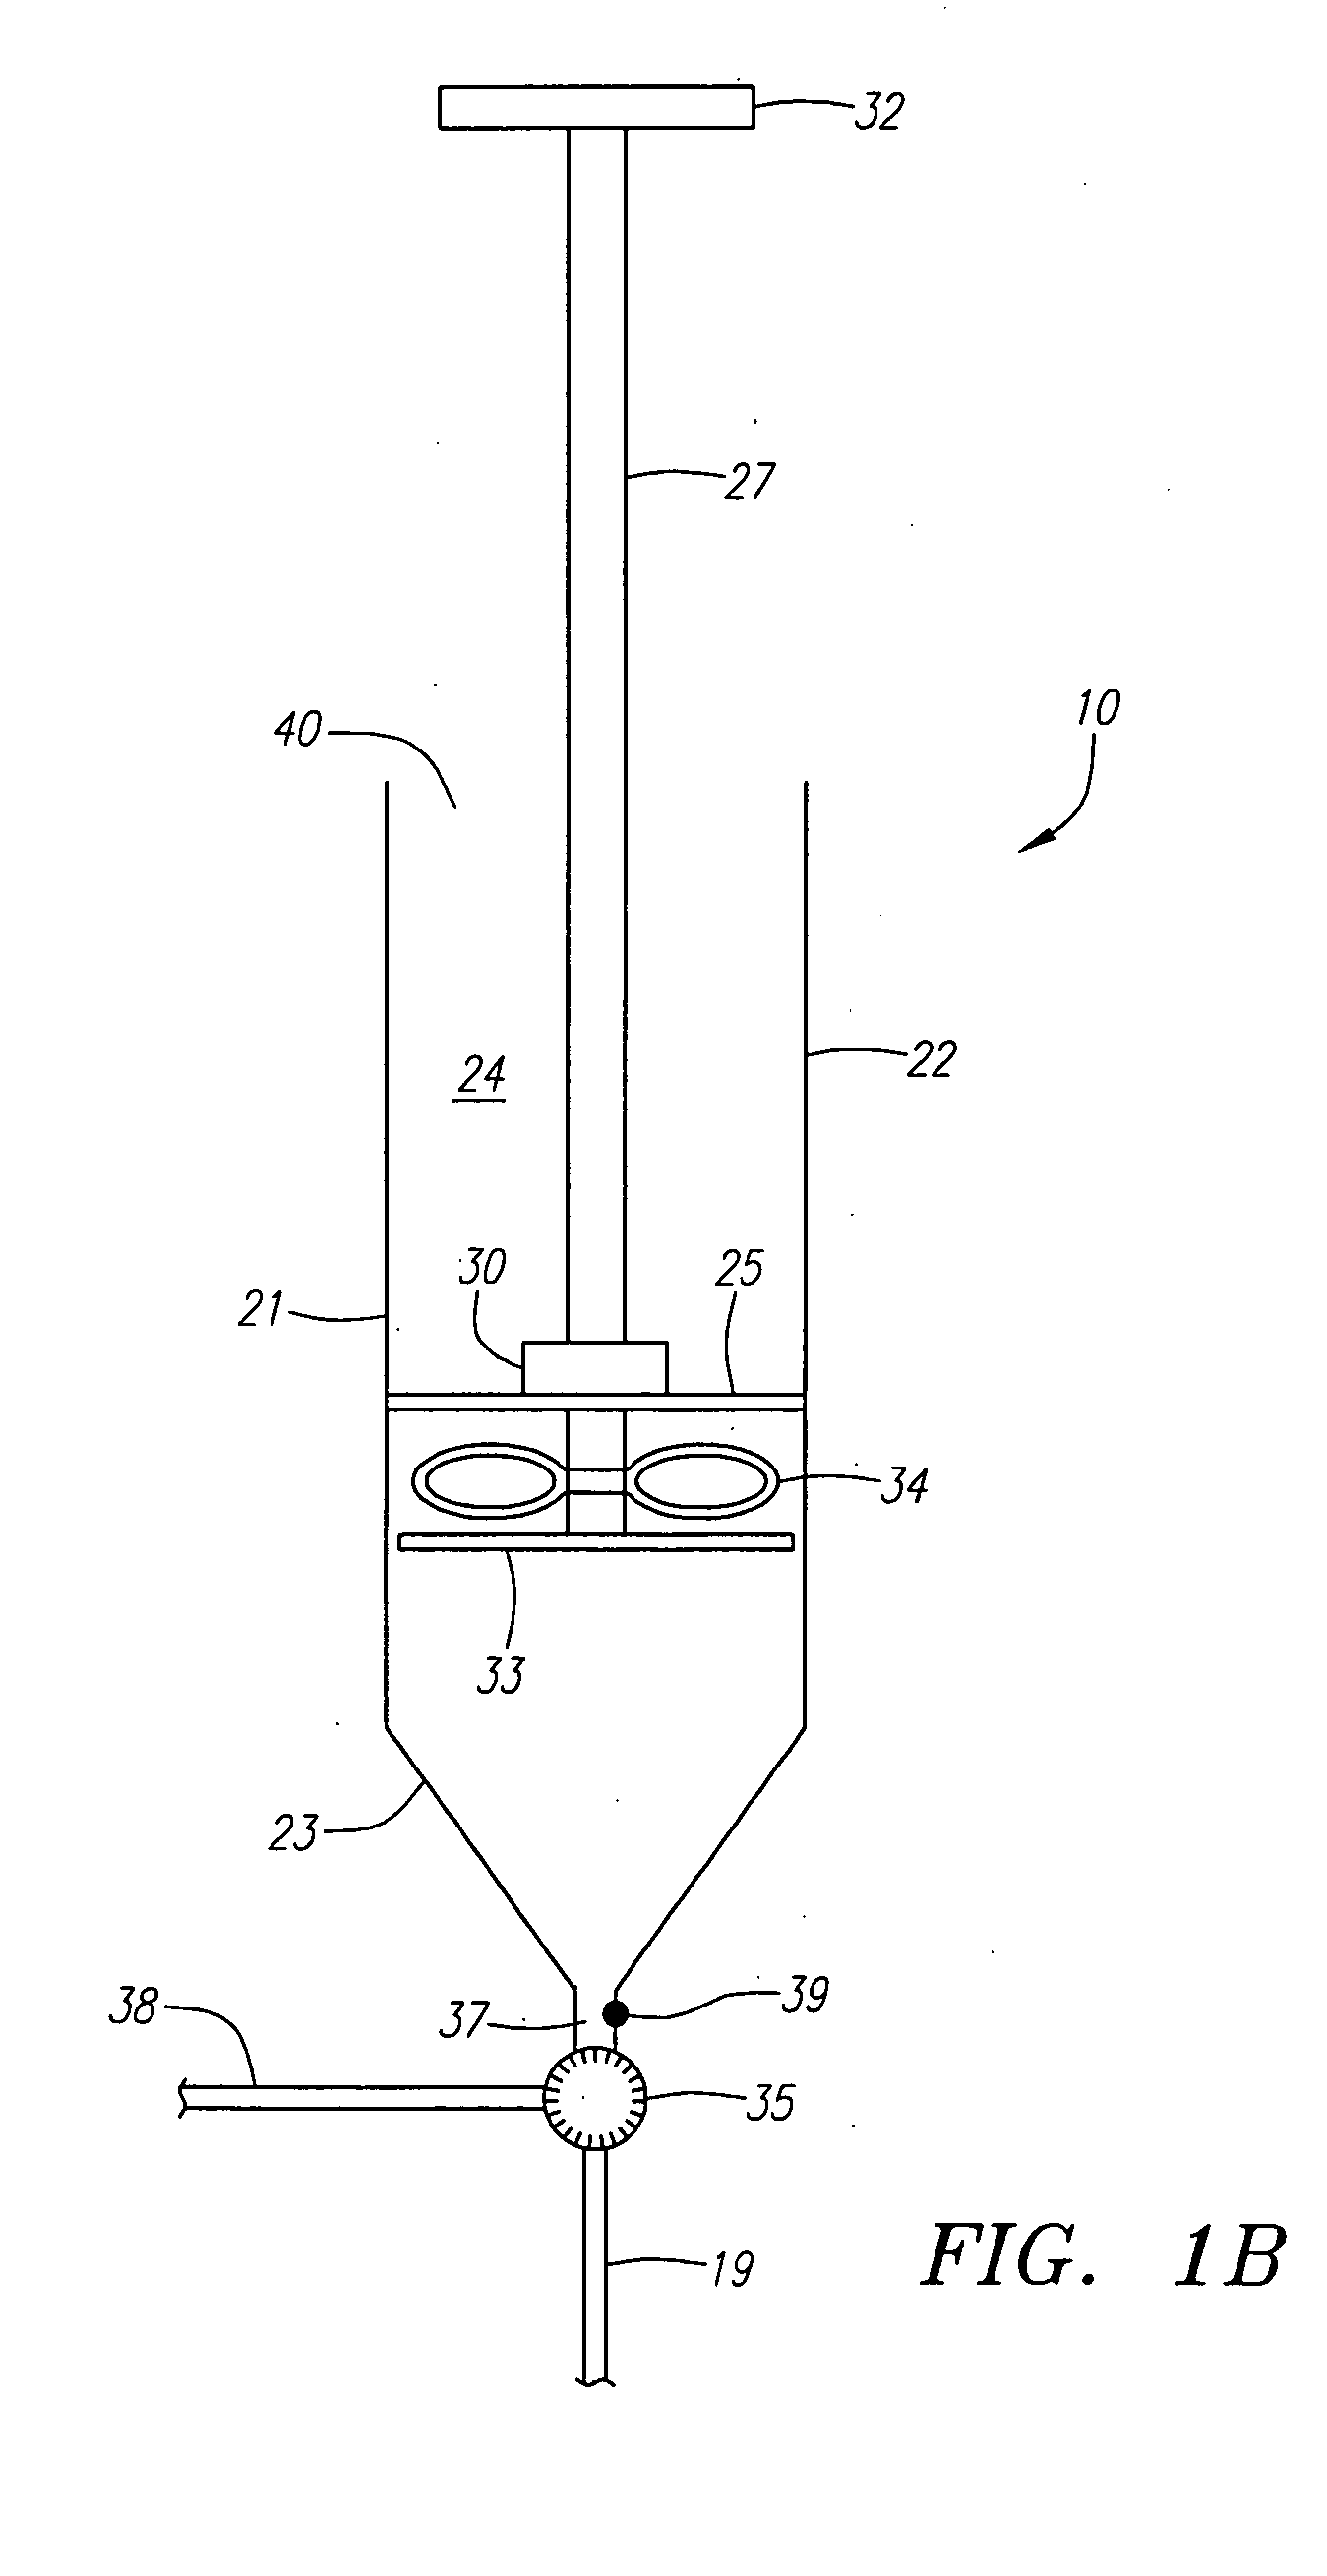 Apparatus for mixing and dispensing a multi-component bone cement